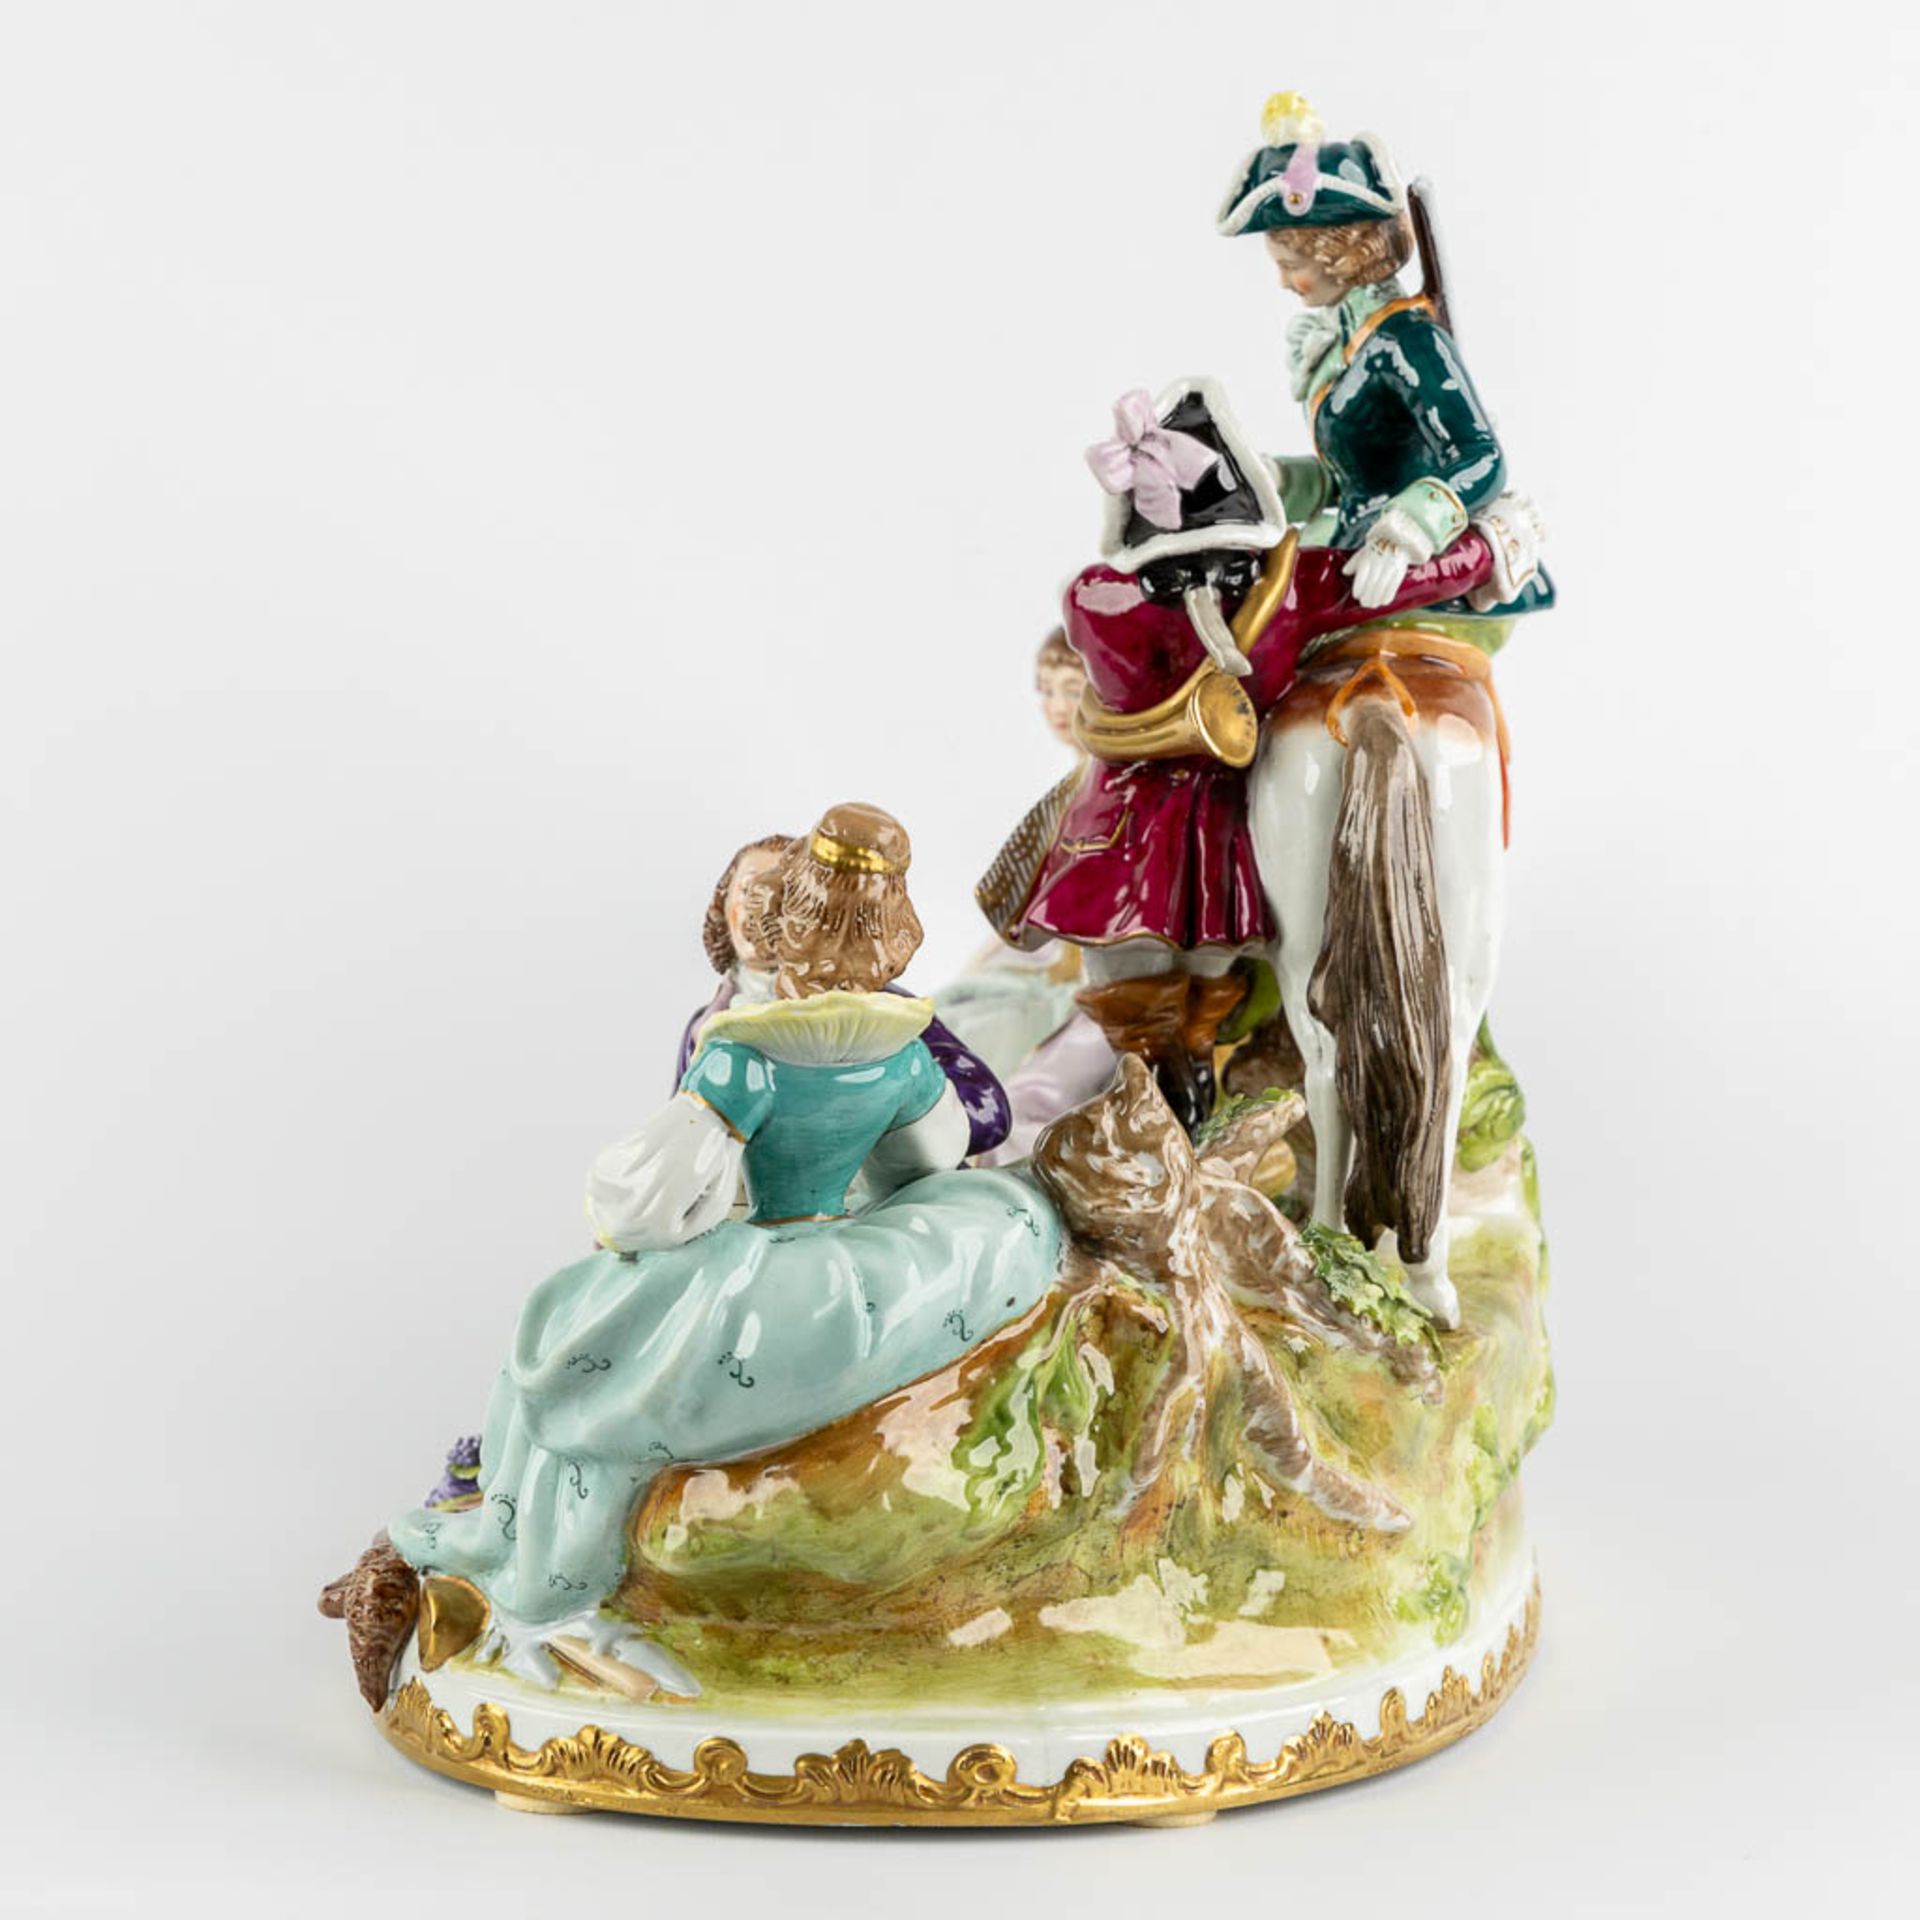 Scheibe-Alsbach, a polychrome porcelain group 'Picnic with multiple figurines'. Saxony, Germany. 20t - Image 6 of 19